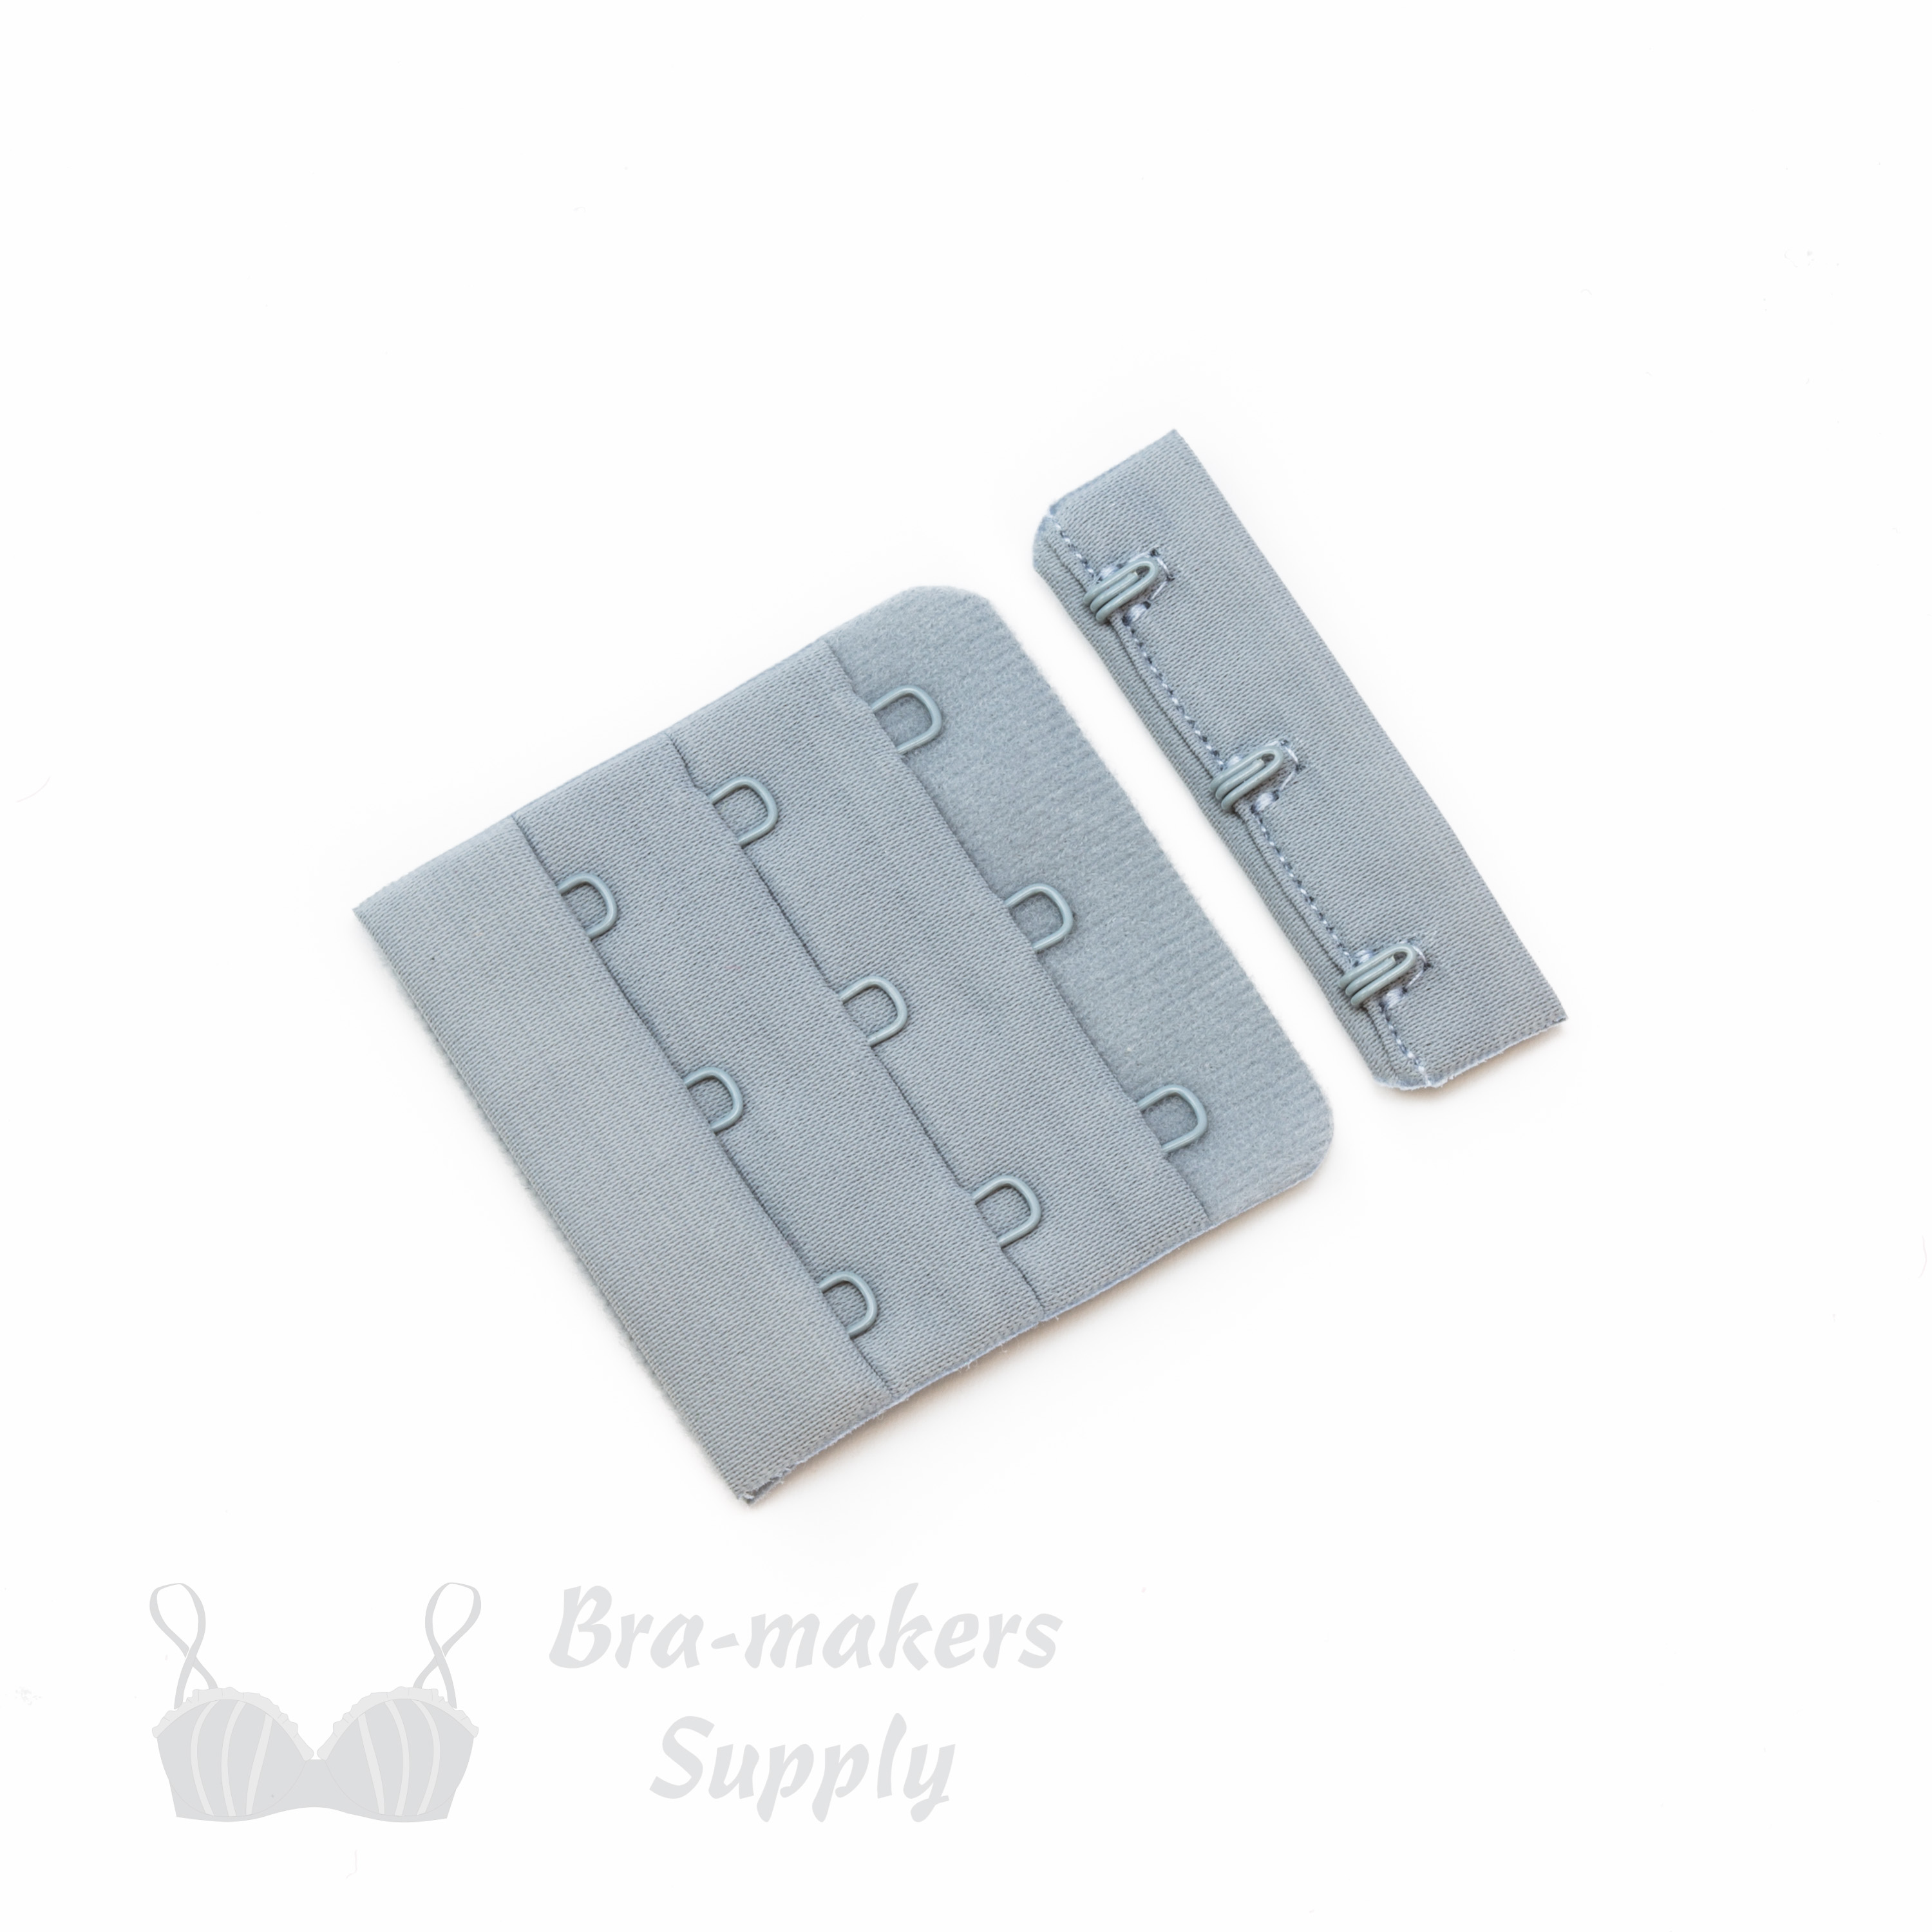 Porcelynne Nude Bra Hook And Eye Replacement Closure With Hardware-3 Rows-2  1/4 Wide-1 Pair - Nude Bra Hook And Eye Replacement Closure With  Hardware-3 Rows-2 1/4 Wide-1 Pair . shop for Porcelynne